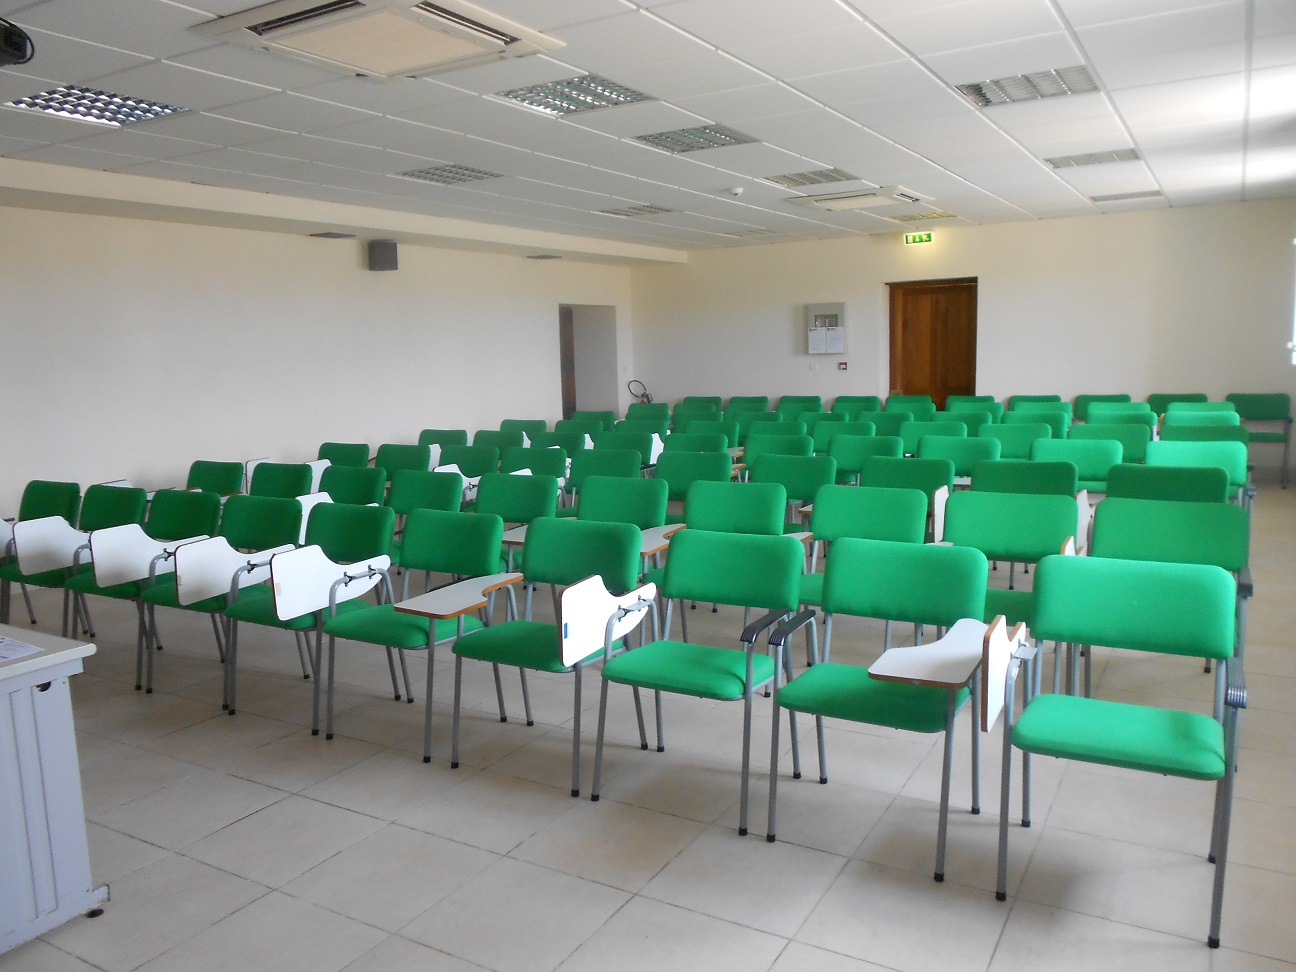 Lecture Hall 5 at University of Malta Gozo Campus